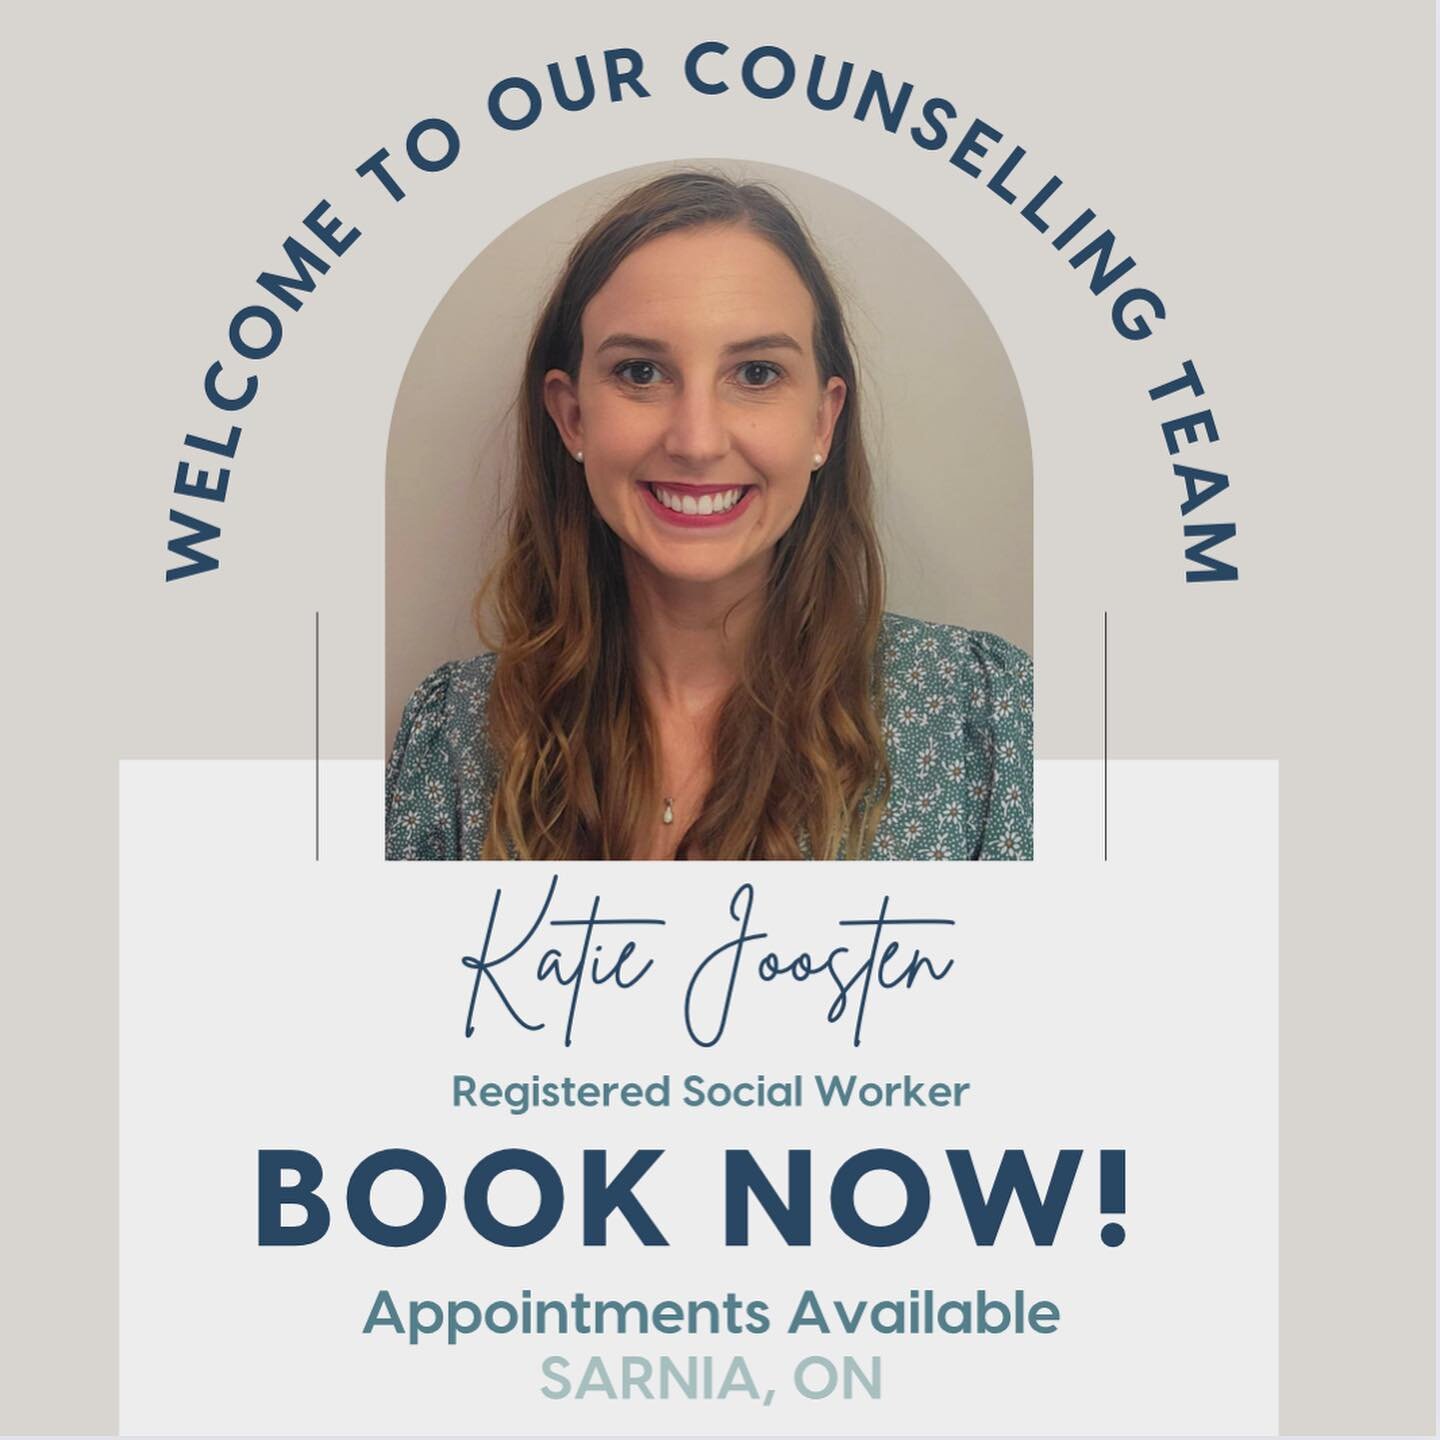 Counselling Appointments Available in Sarnia!! FREE CONSULTS. We are thrilled to announce that Katie is joining our team!✨

With over 15 years of experience, she is eager to continue supporting our incredible community and help you learn to thrive in